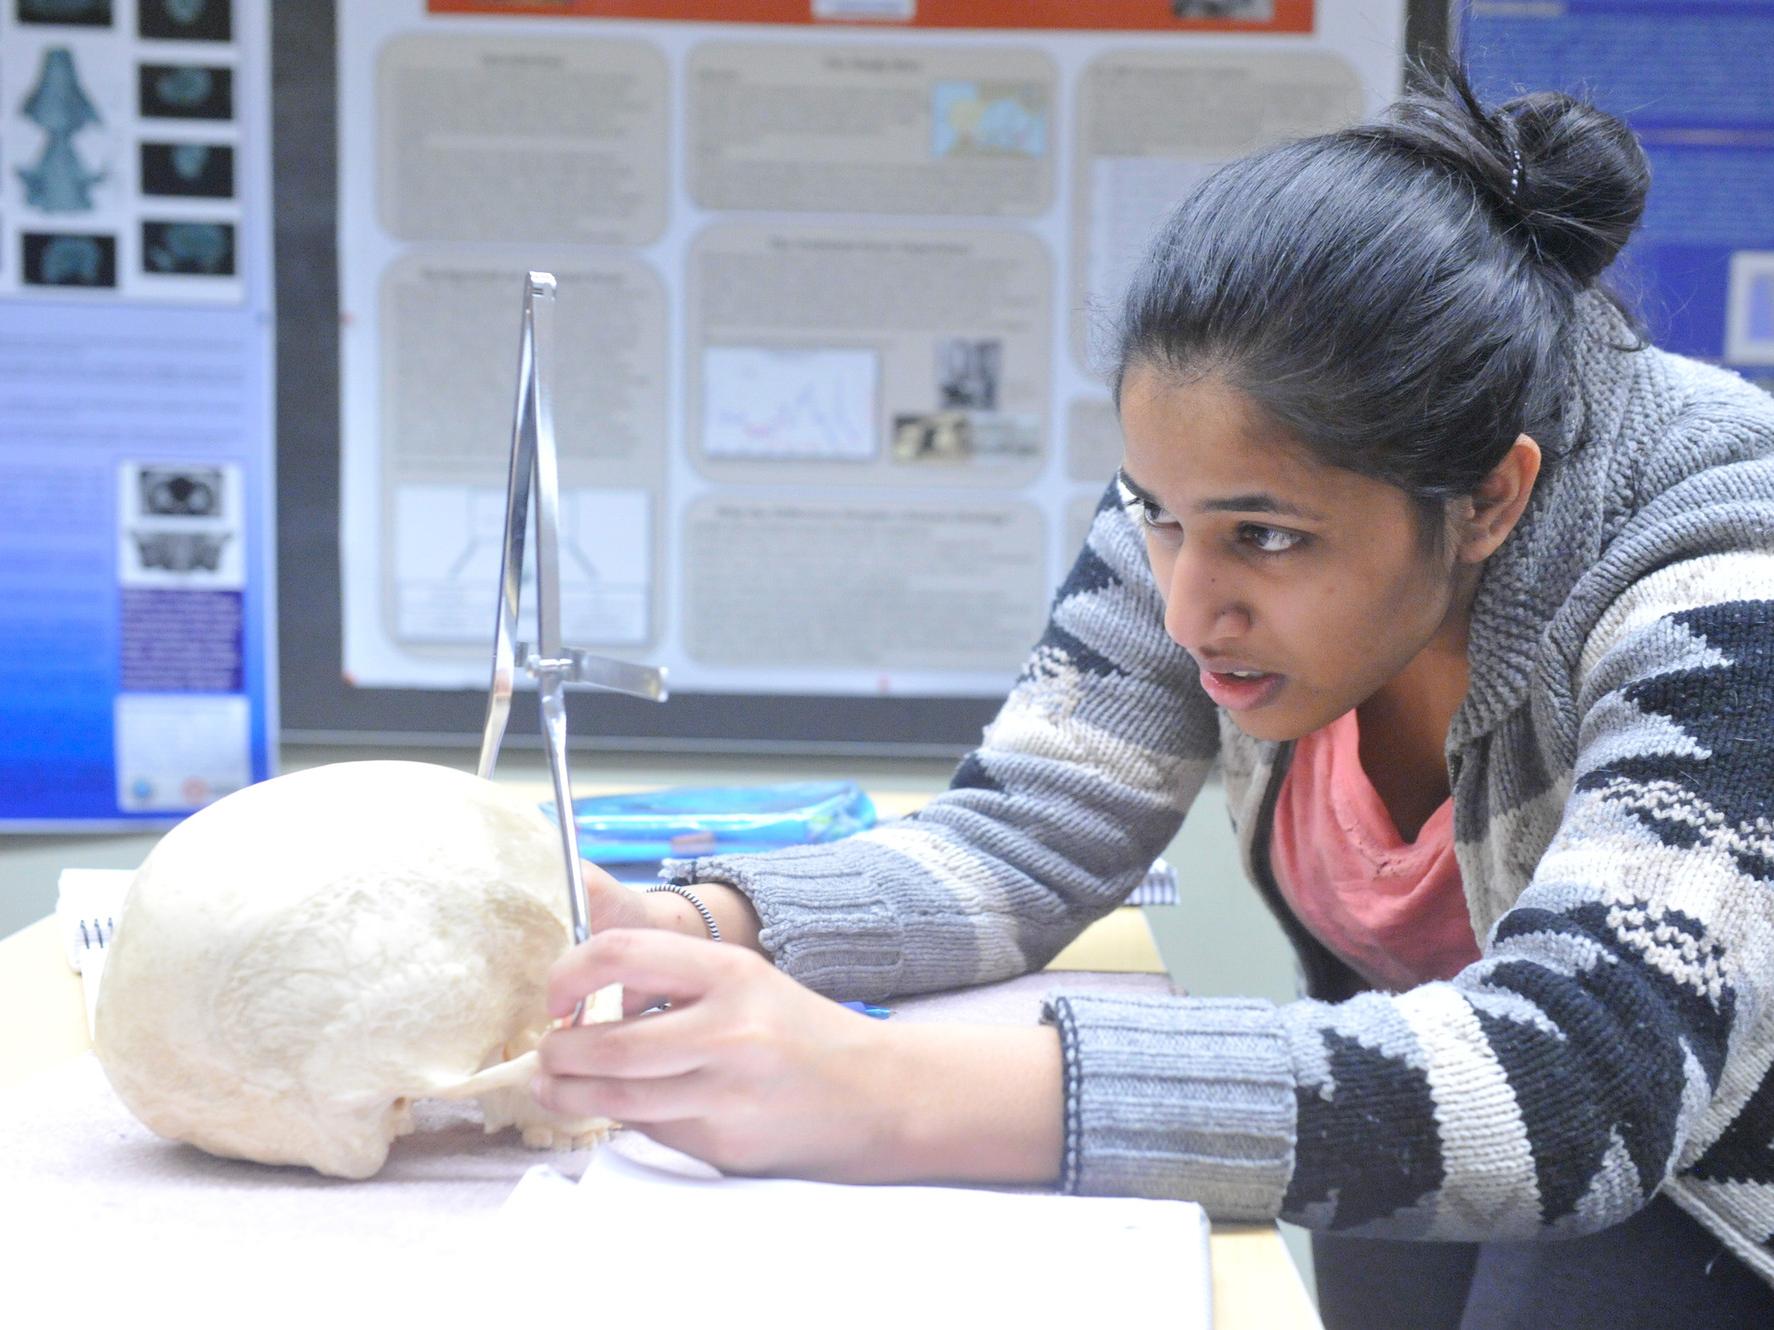 A student measuring a skull